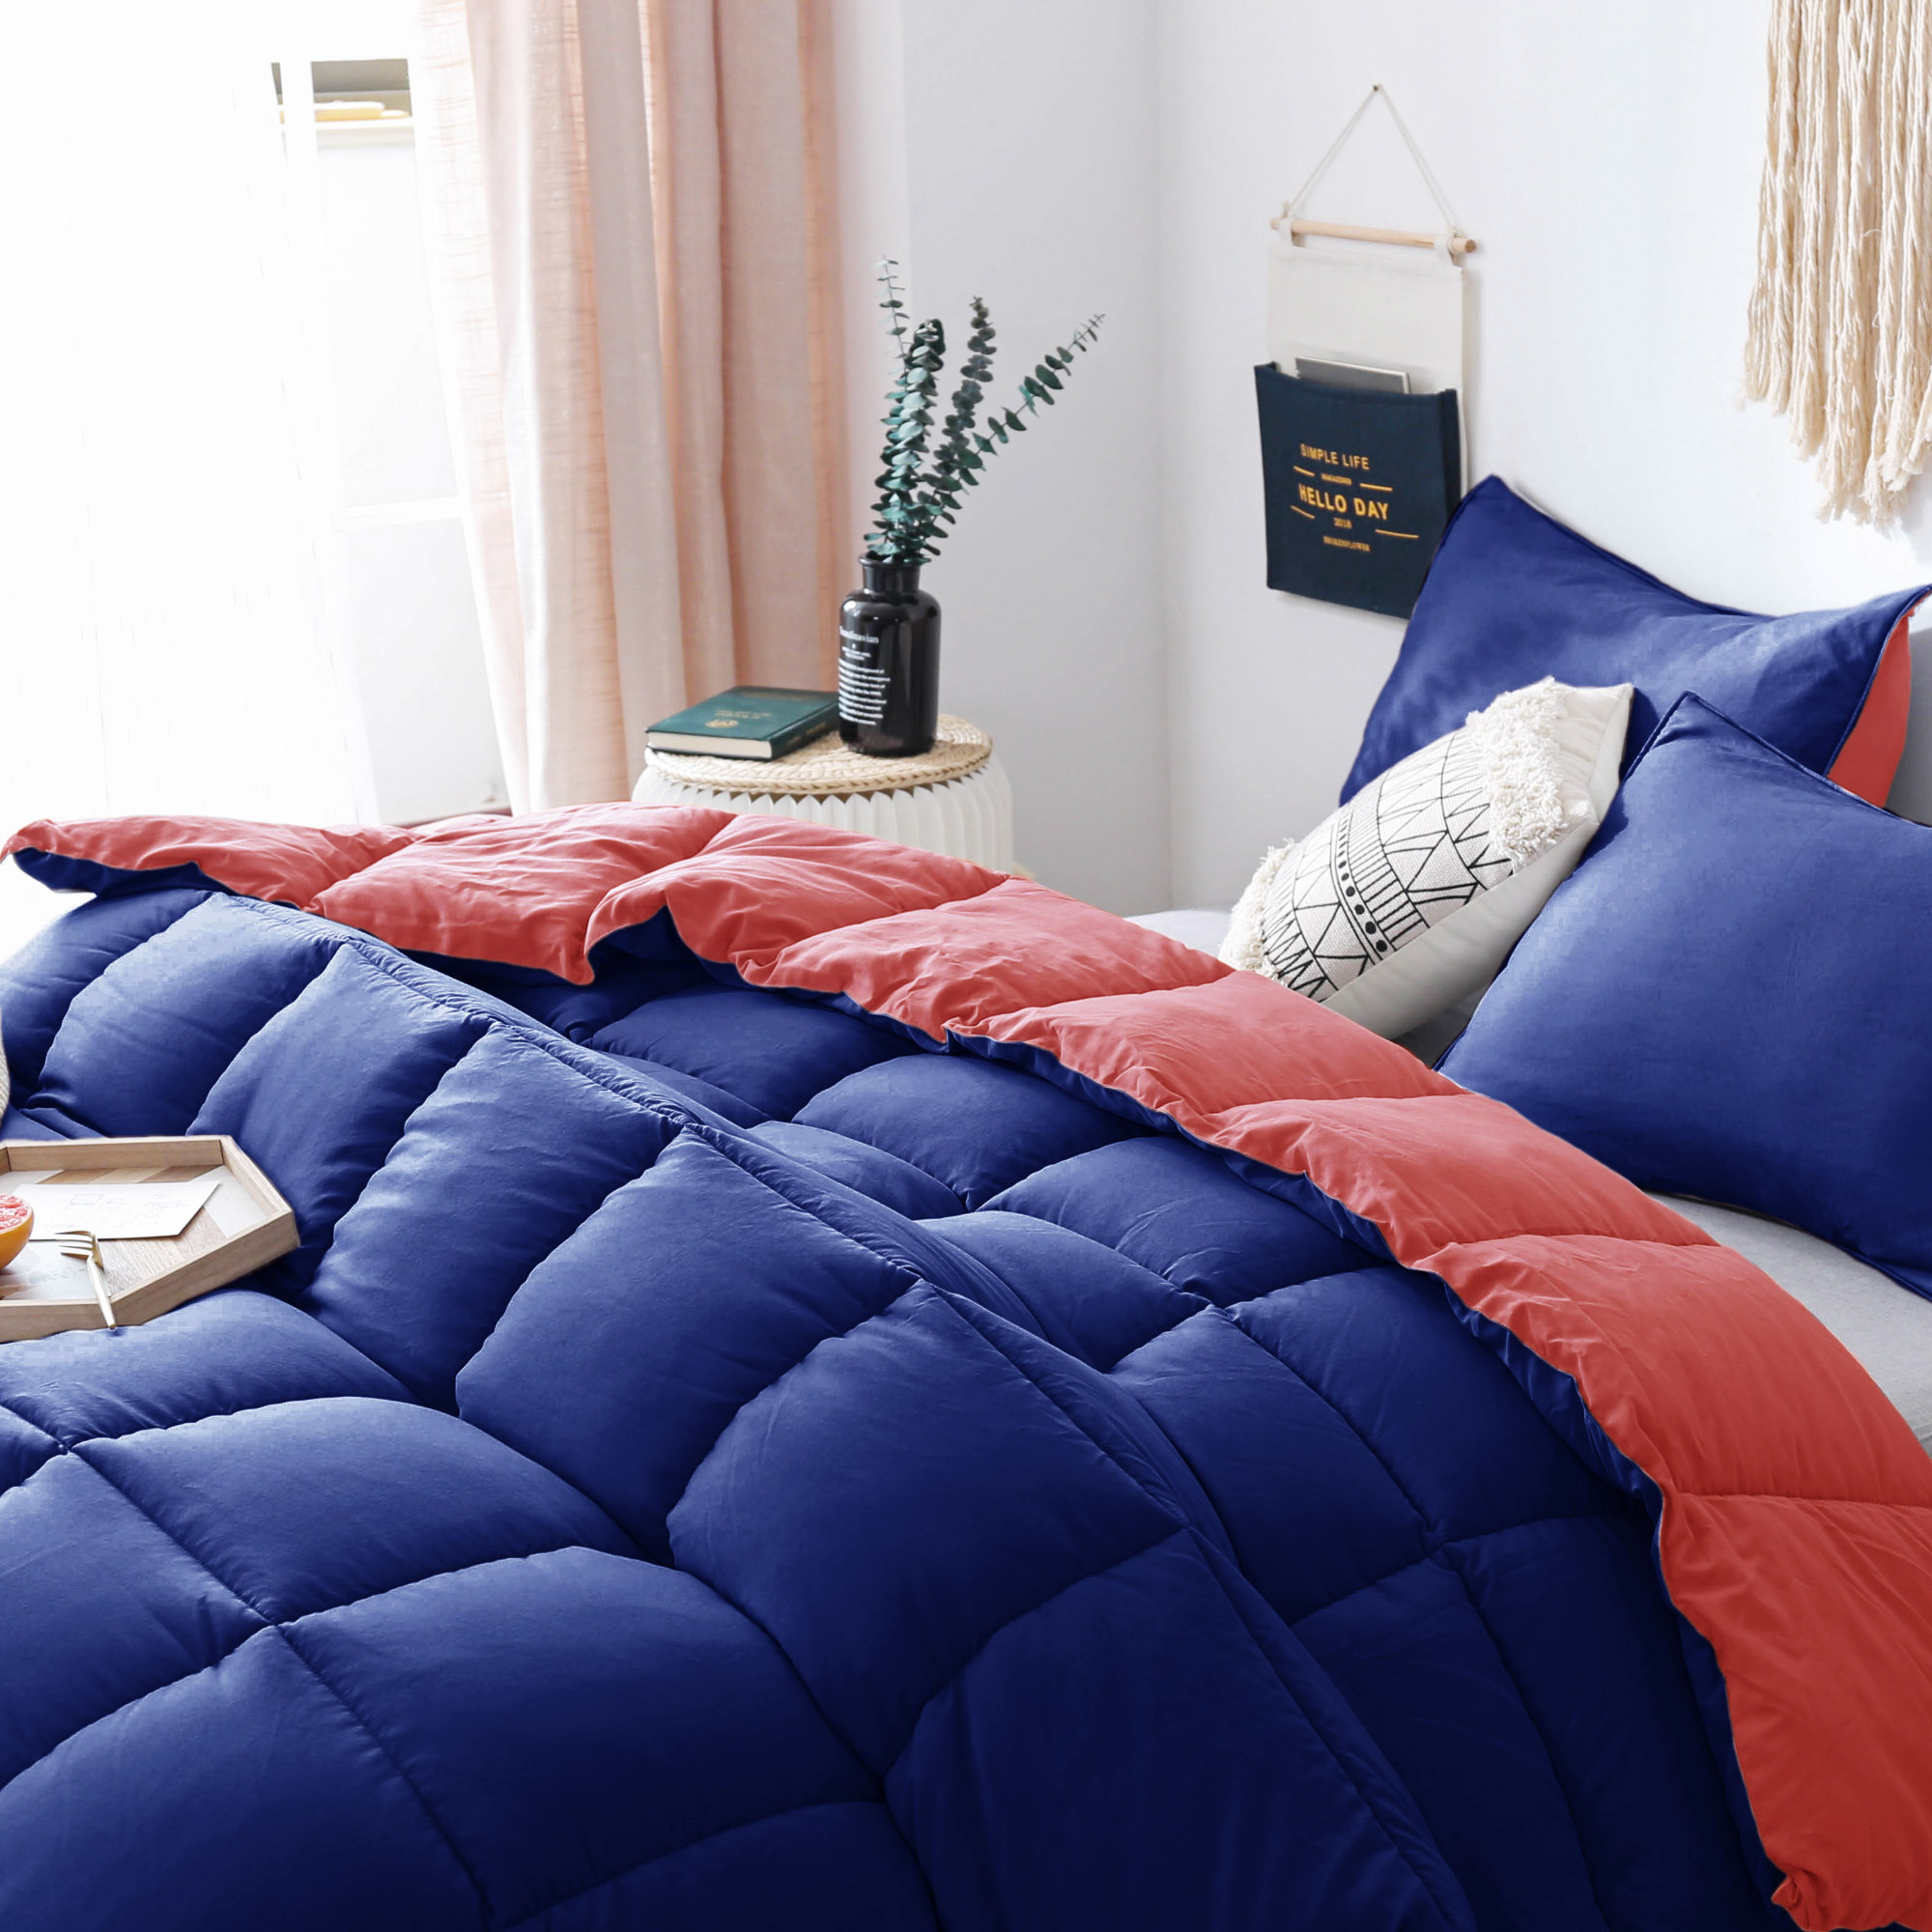 Kasentex Reversible Cozy Soft Luxury Down Alternative Comforter Set Navy/Coral with 2 Pillow Shams